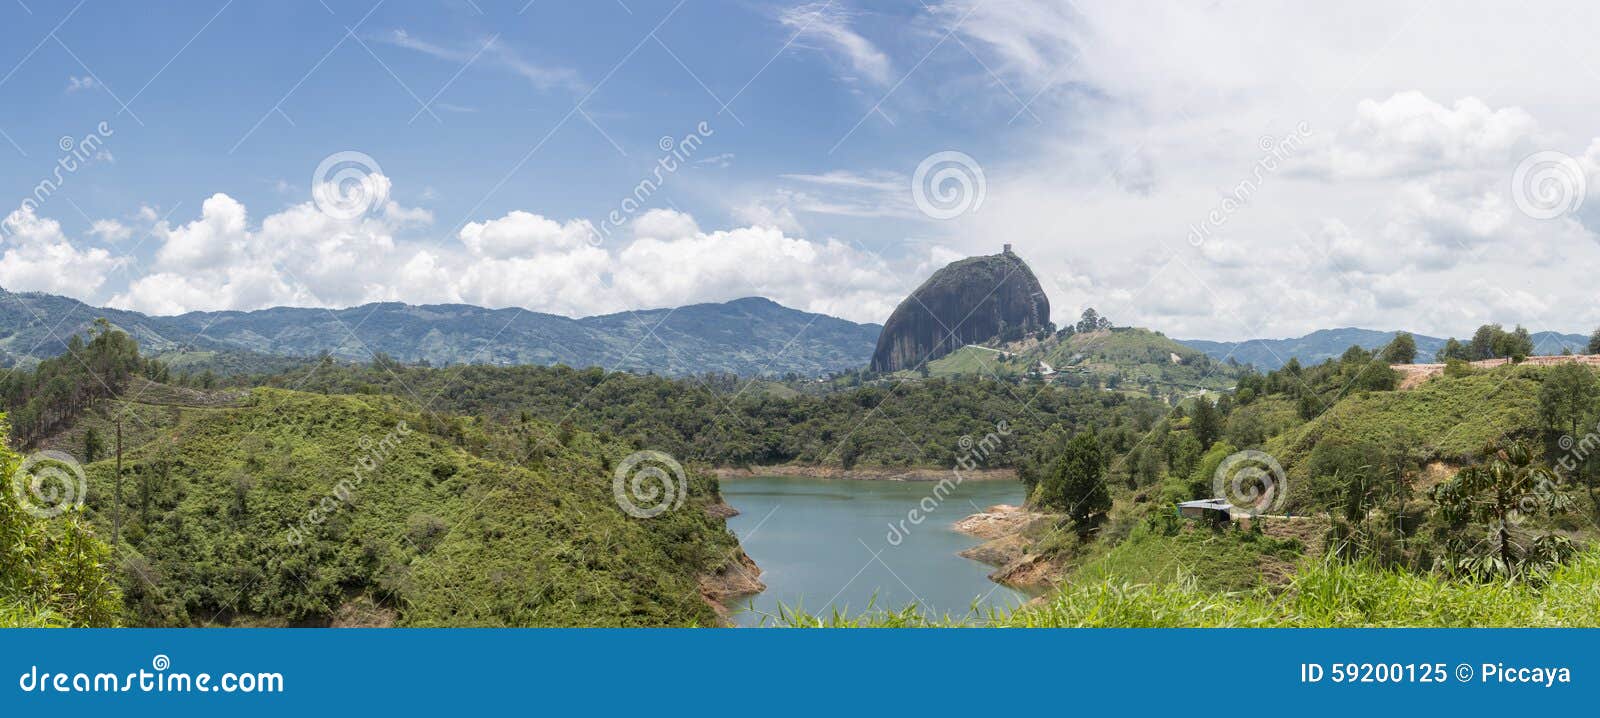 lakes and the piedra el penol at guatape in antioquia, colombia